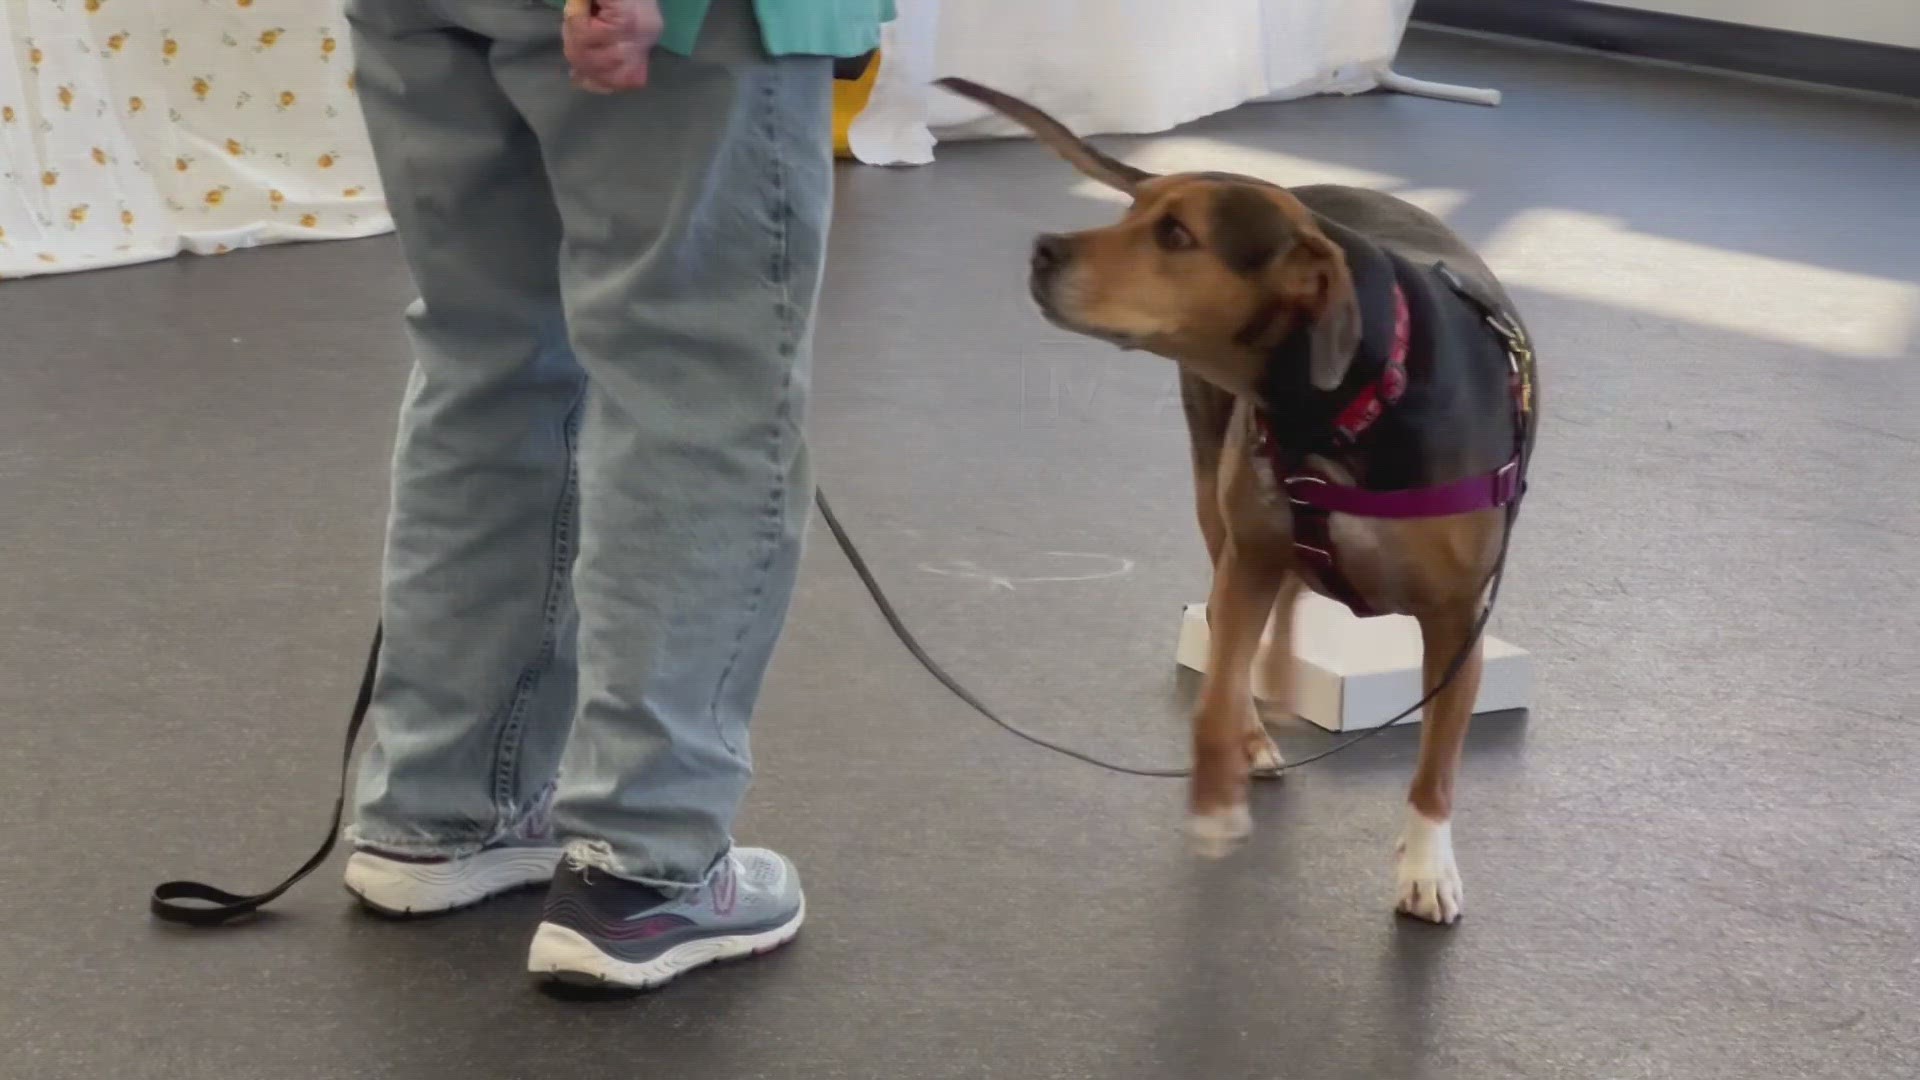 Five dogs are taking part in a nationwide study organized by Texas Tech and Virginia Tech researchers to see if dogs have the ability to detect invasive species.